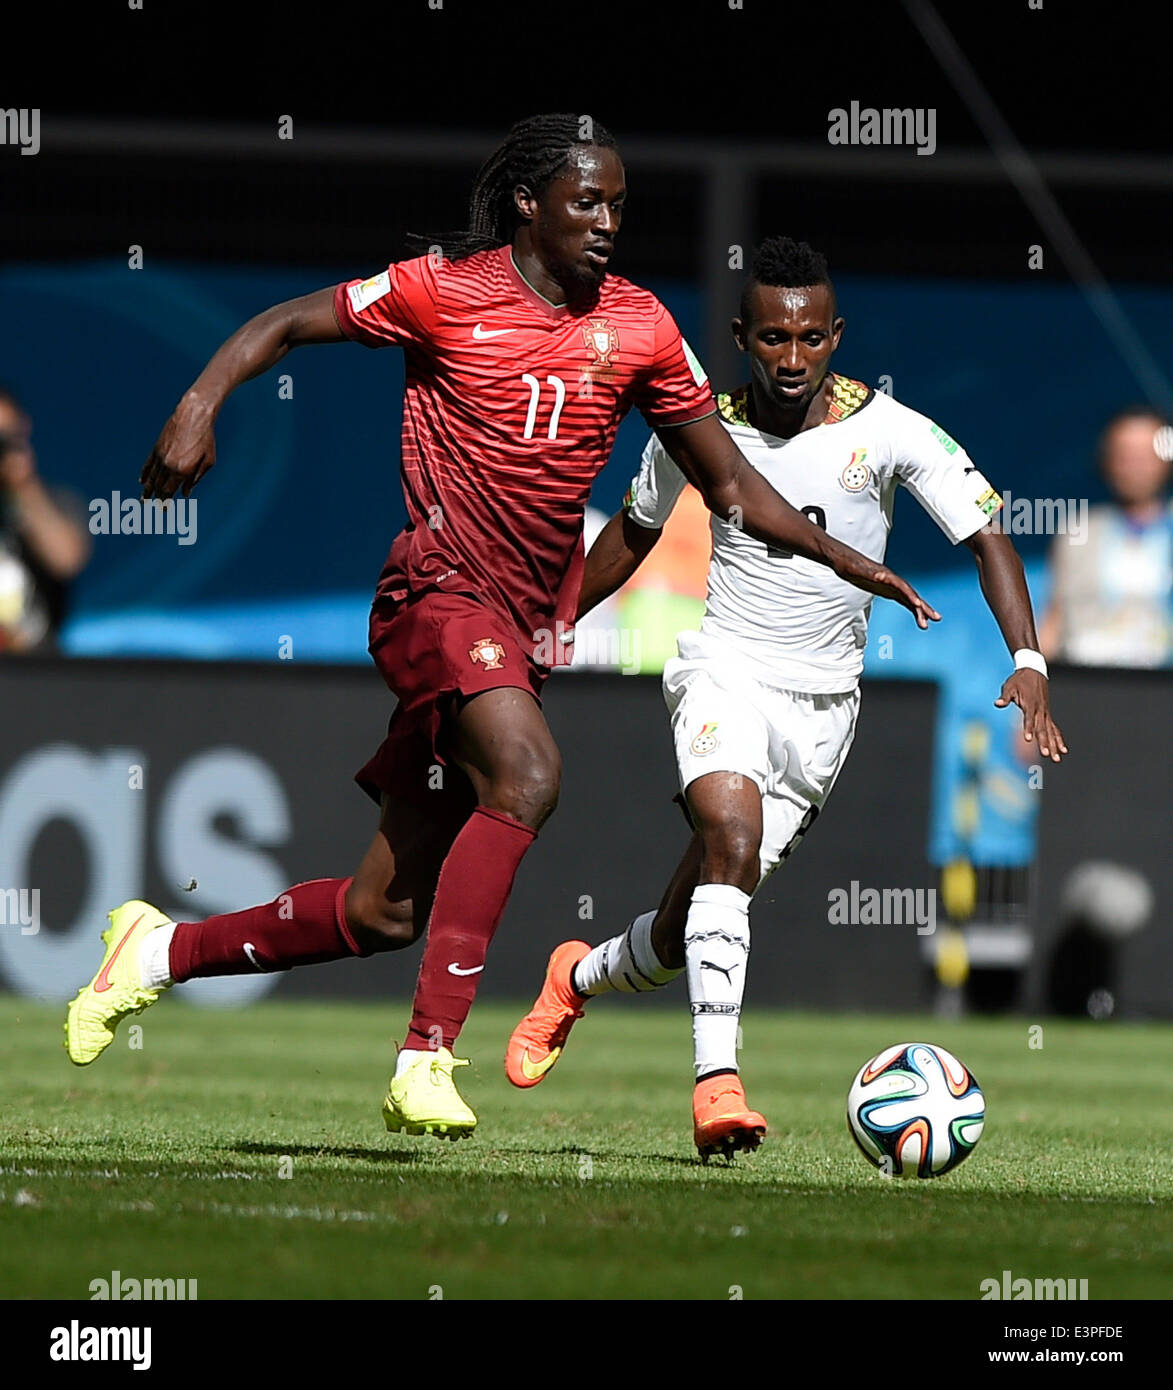 Brasilia, Brazil. 26th June, 2014. Portugal's Eder (L) vies with Ghana's Abdul Majeed Waris during a Group G match between Portugal and Ghana of 2014 FIFA World Cup at the Estadio Nacional Stadium in Brasilia, Brazil, June 26, 2014. Portugal won 2-1 over Ghana on Thursday. © Qi Heng/Xinhua/Alamy Live News Stock Photo